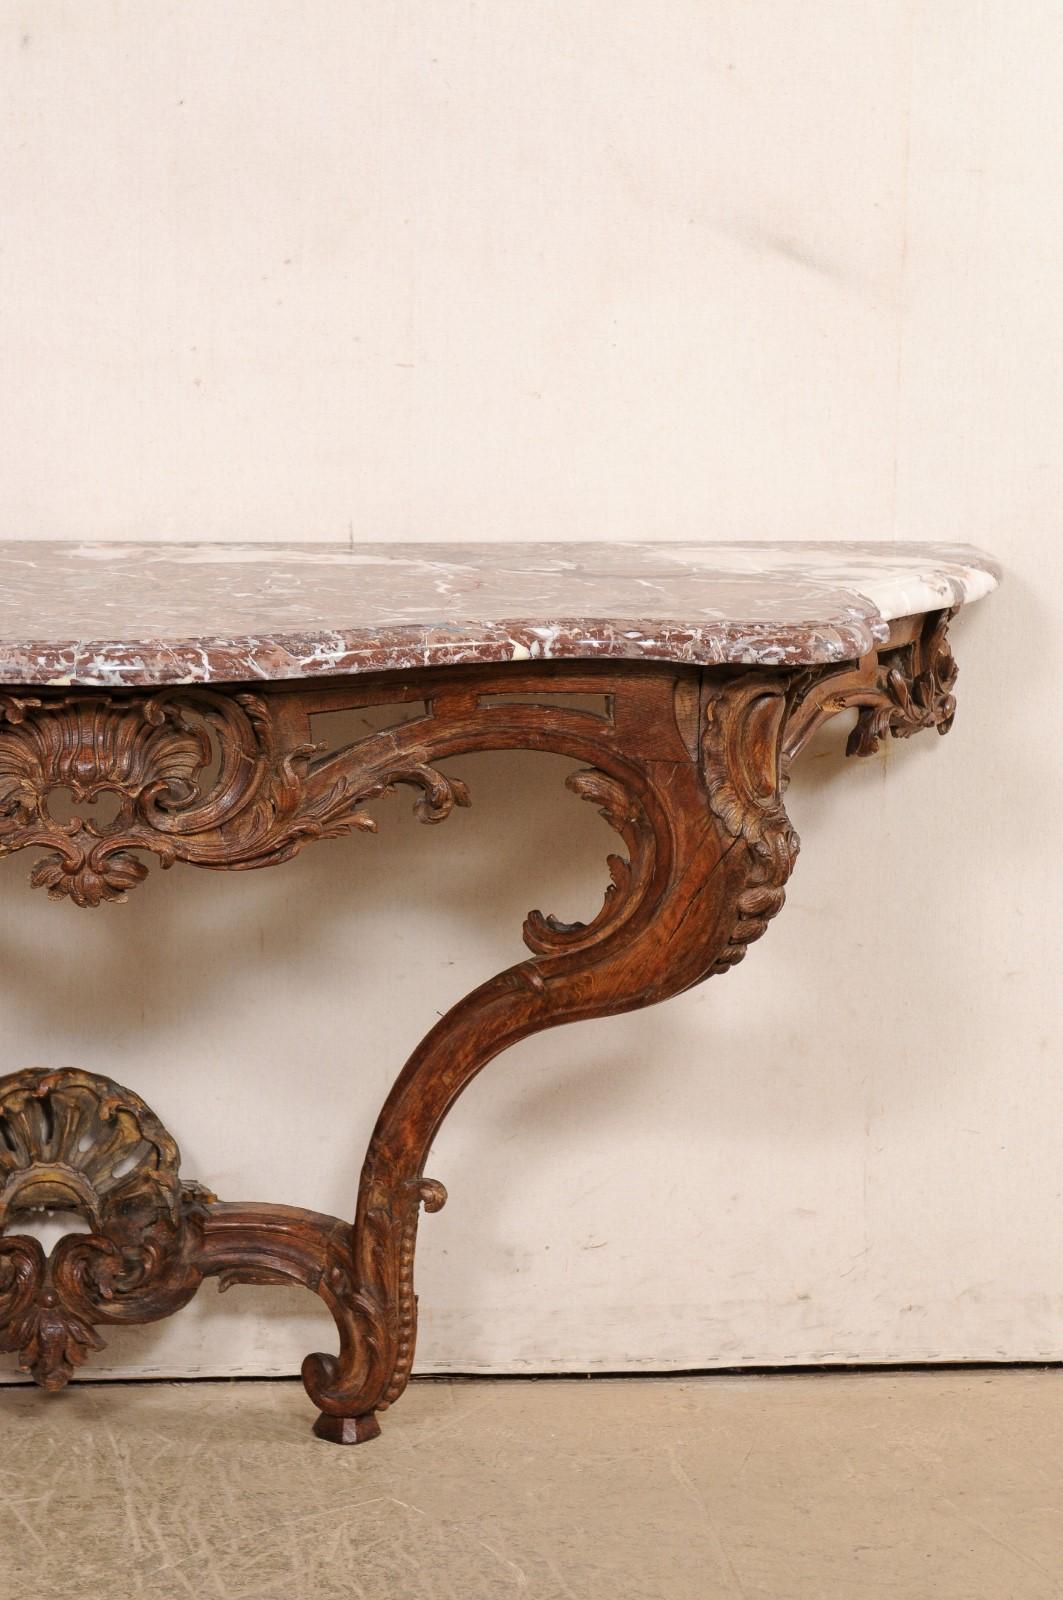 An Exquisite 18th C. French Rococo Serpentine Wall Console w/Marble Top For Sale 1